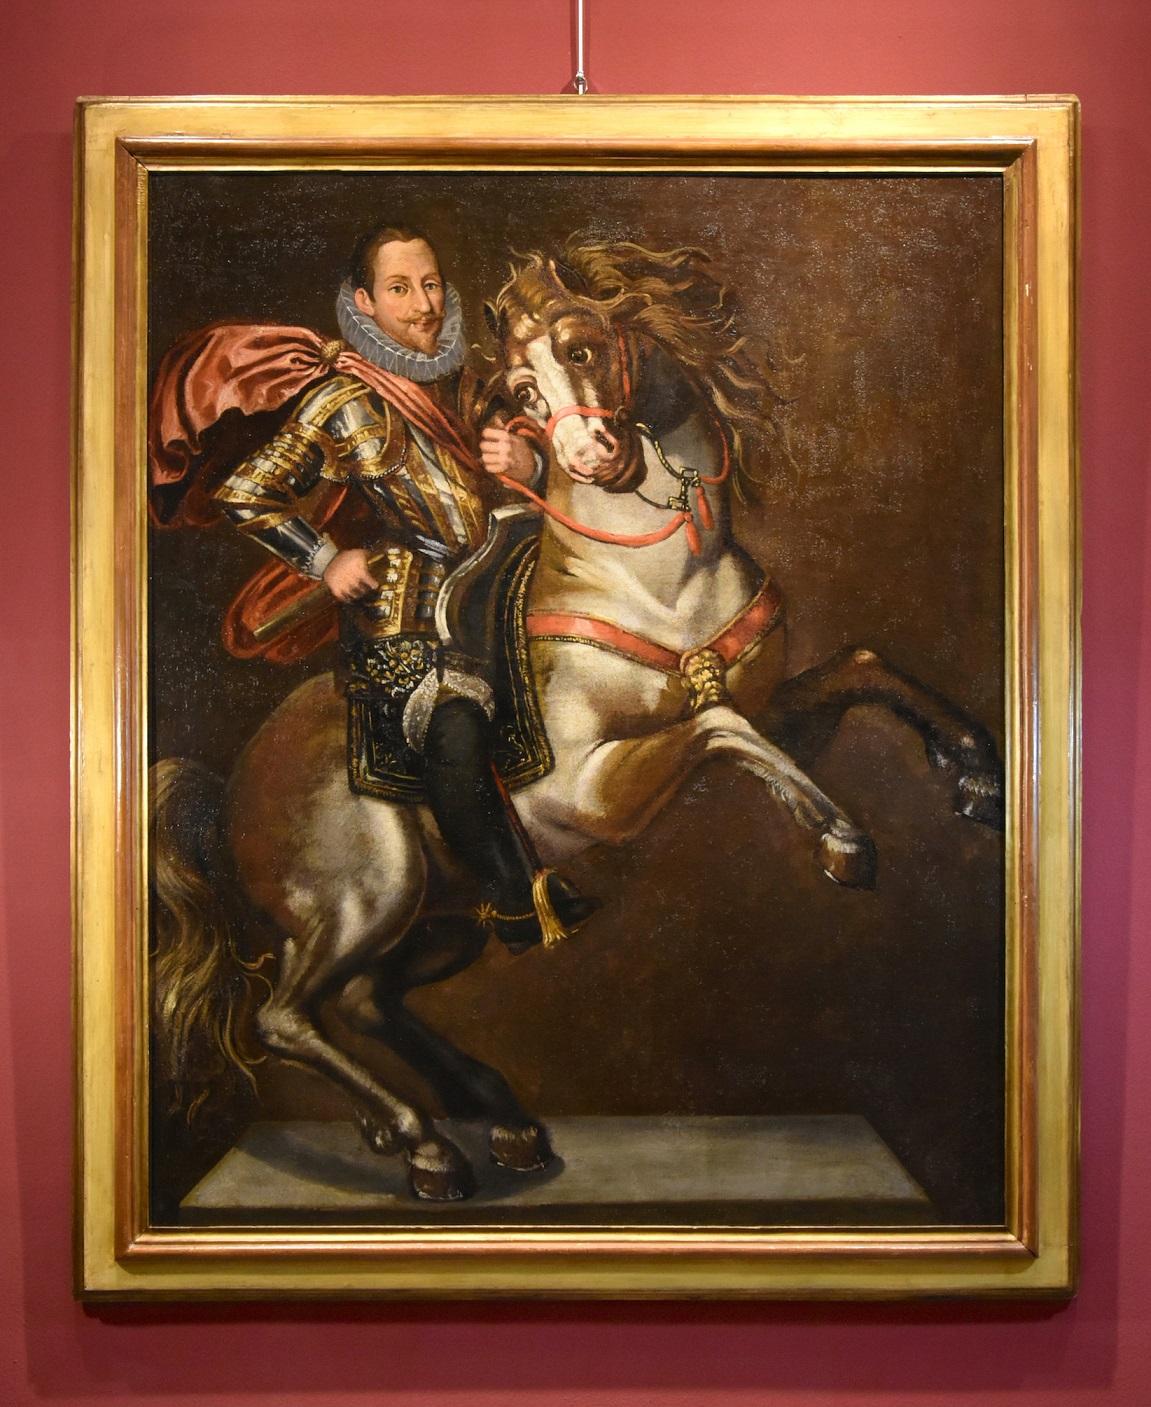 Equestrian Portrait Kraeck Paint Oil on canvas Old master 16/17th Century Italy - Painting by Jan Kraeck, in Italy Giovanni Caracca (Haarlem c. 1540 - Turin 1607) 